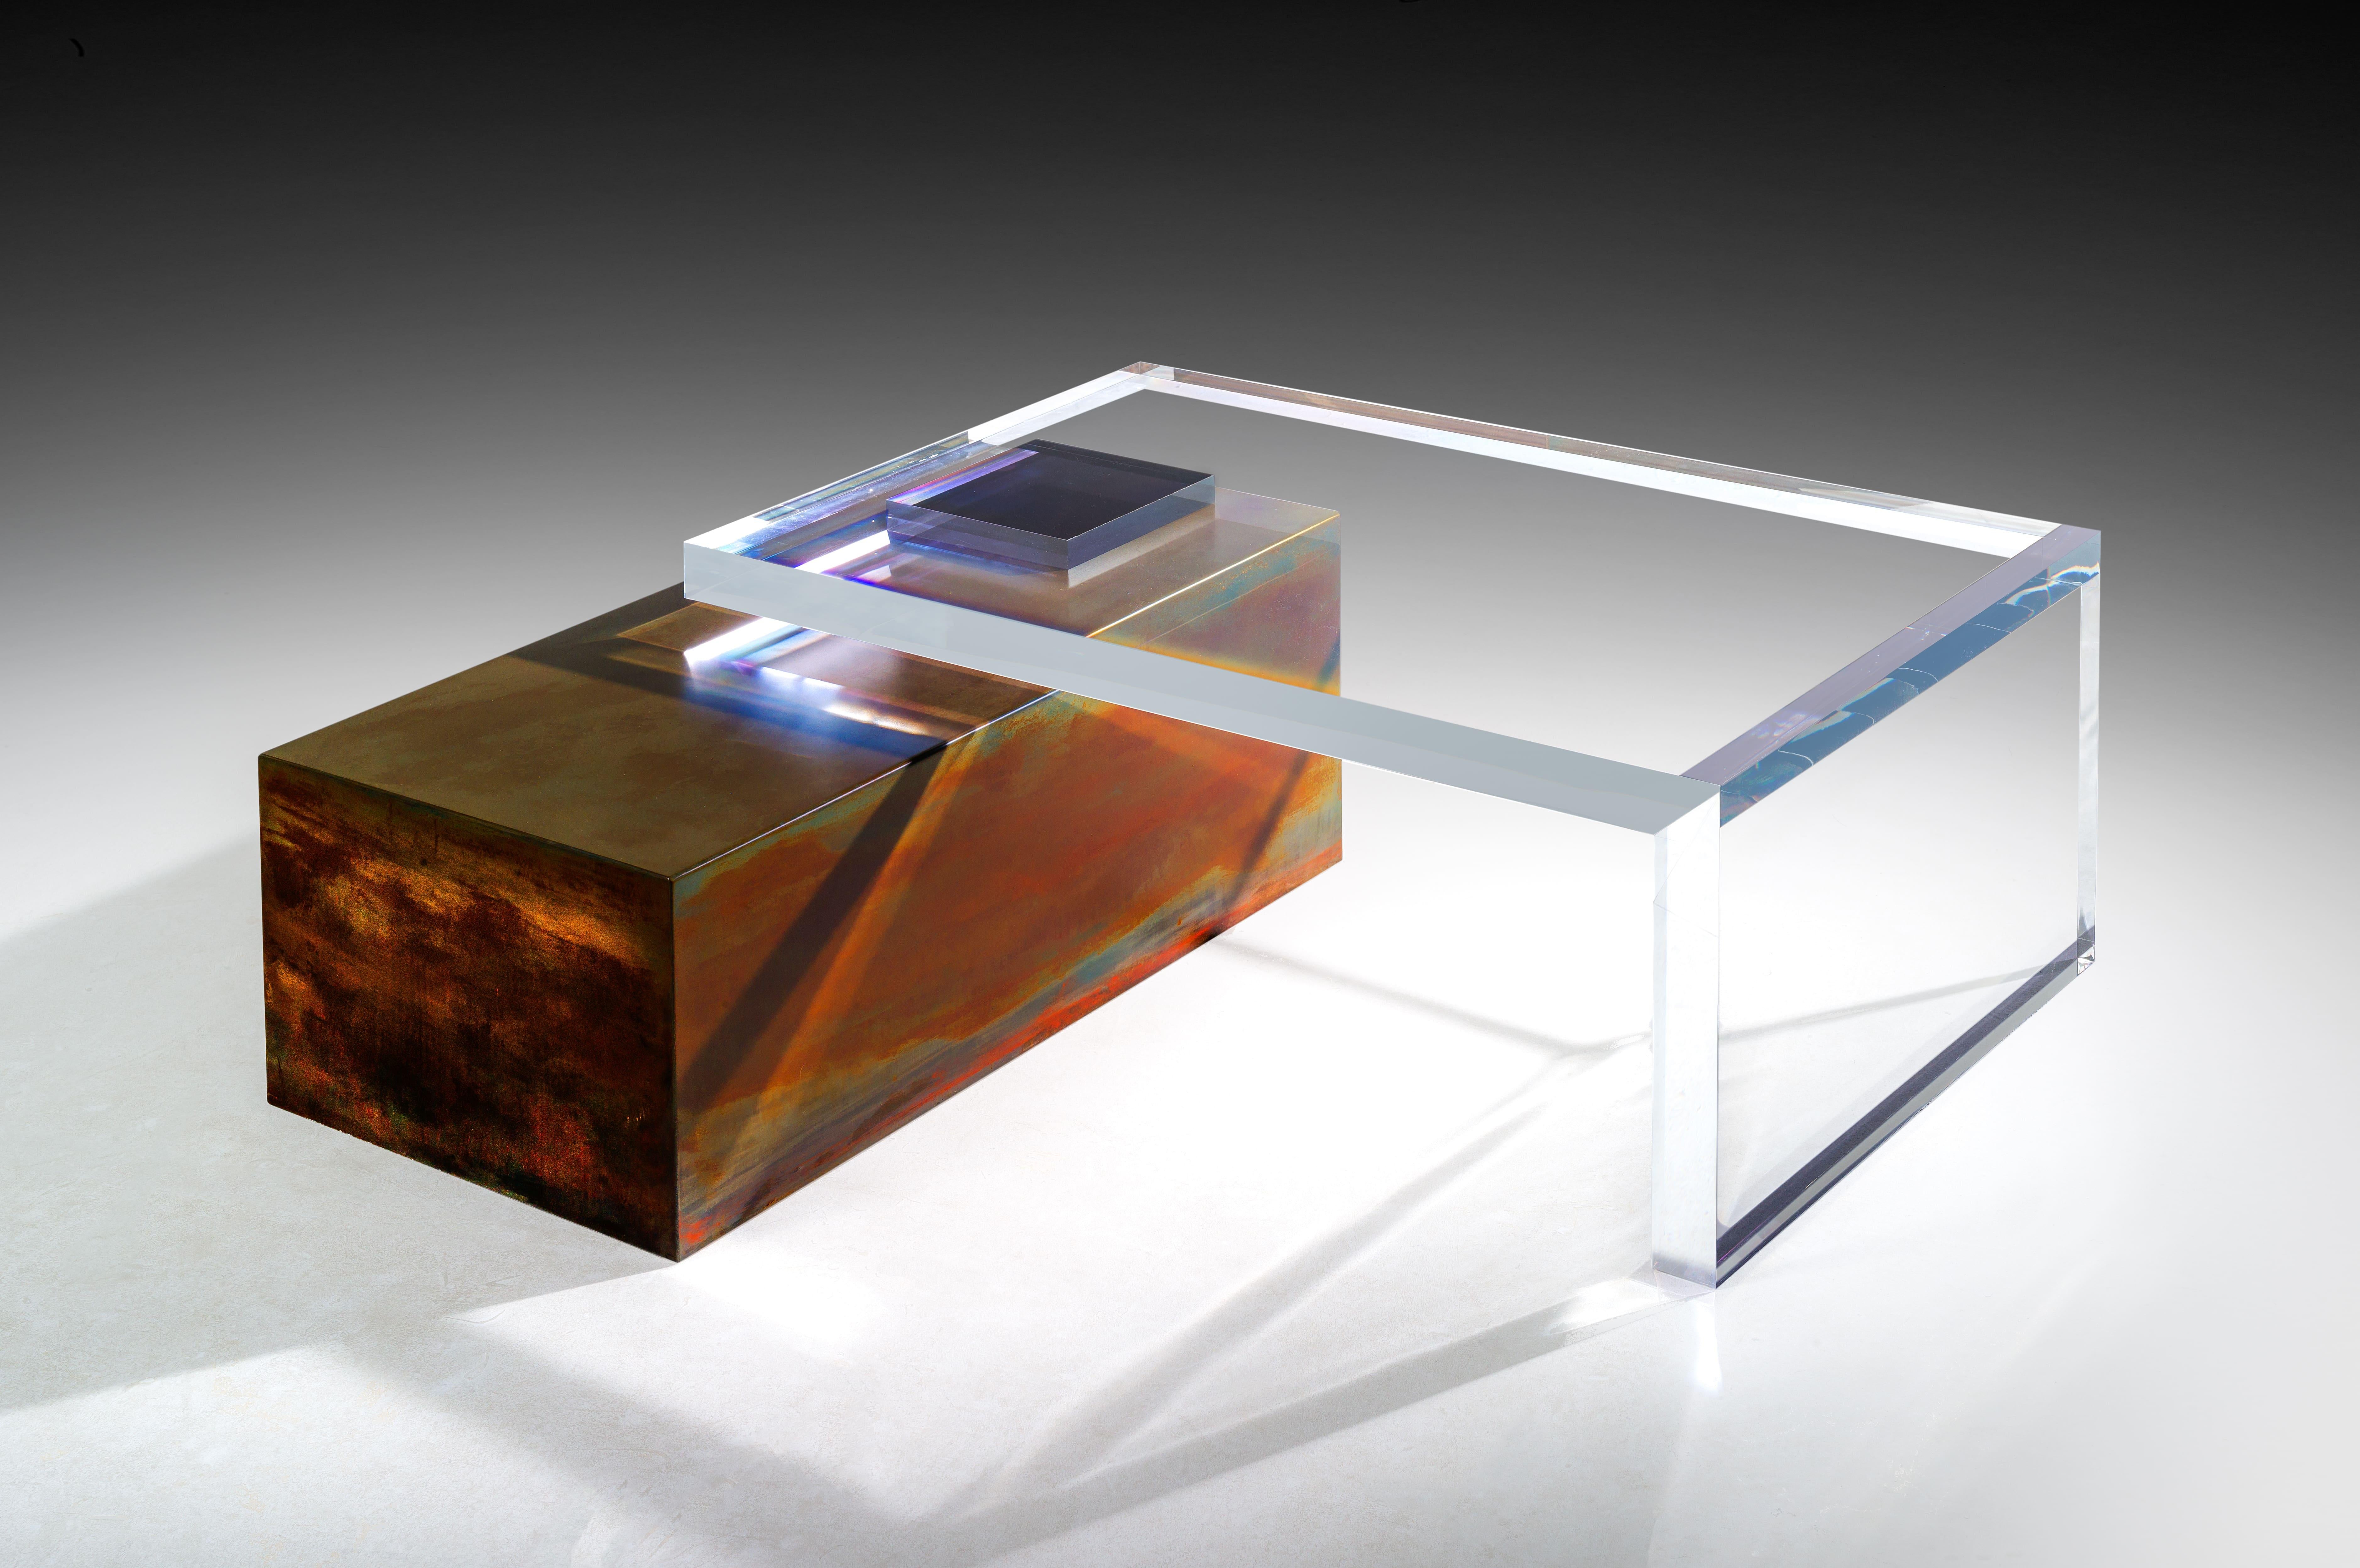 Ghost Altuglas Coffee Table by Charly Bounan
Hand-sculpted Altuglas and sculpted design artwork
Dimensions Altuglas part : 120 x 75 x 40 cm
 Sculpted Bloc: 100 x 55 x 36.5 cm
Material: Altuglas
Signed Charly Bounan

Charly Bounan, is a